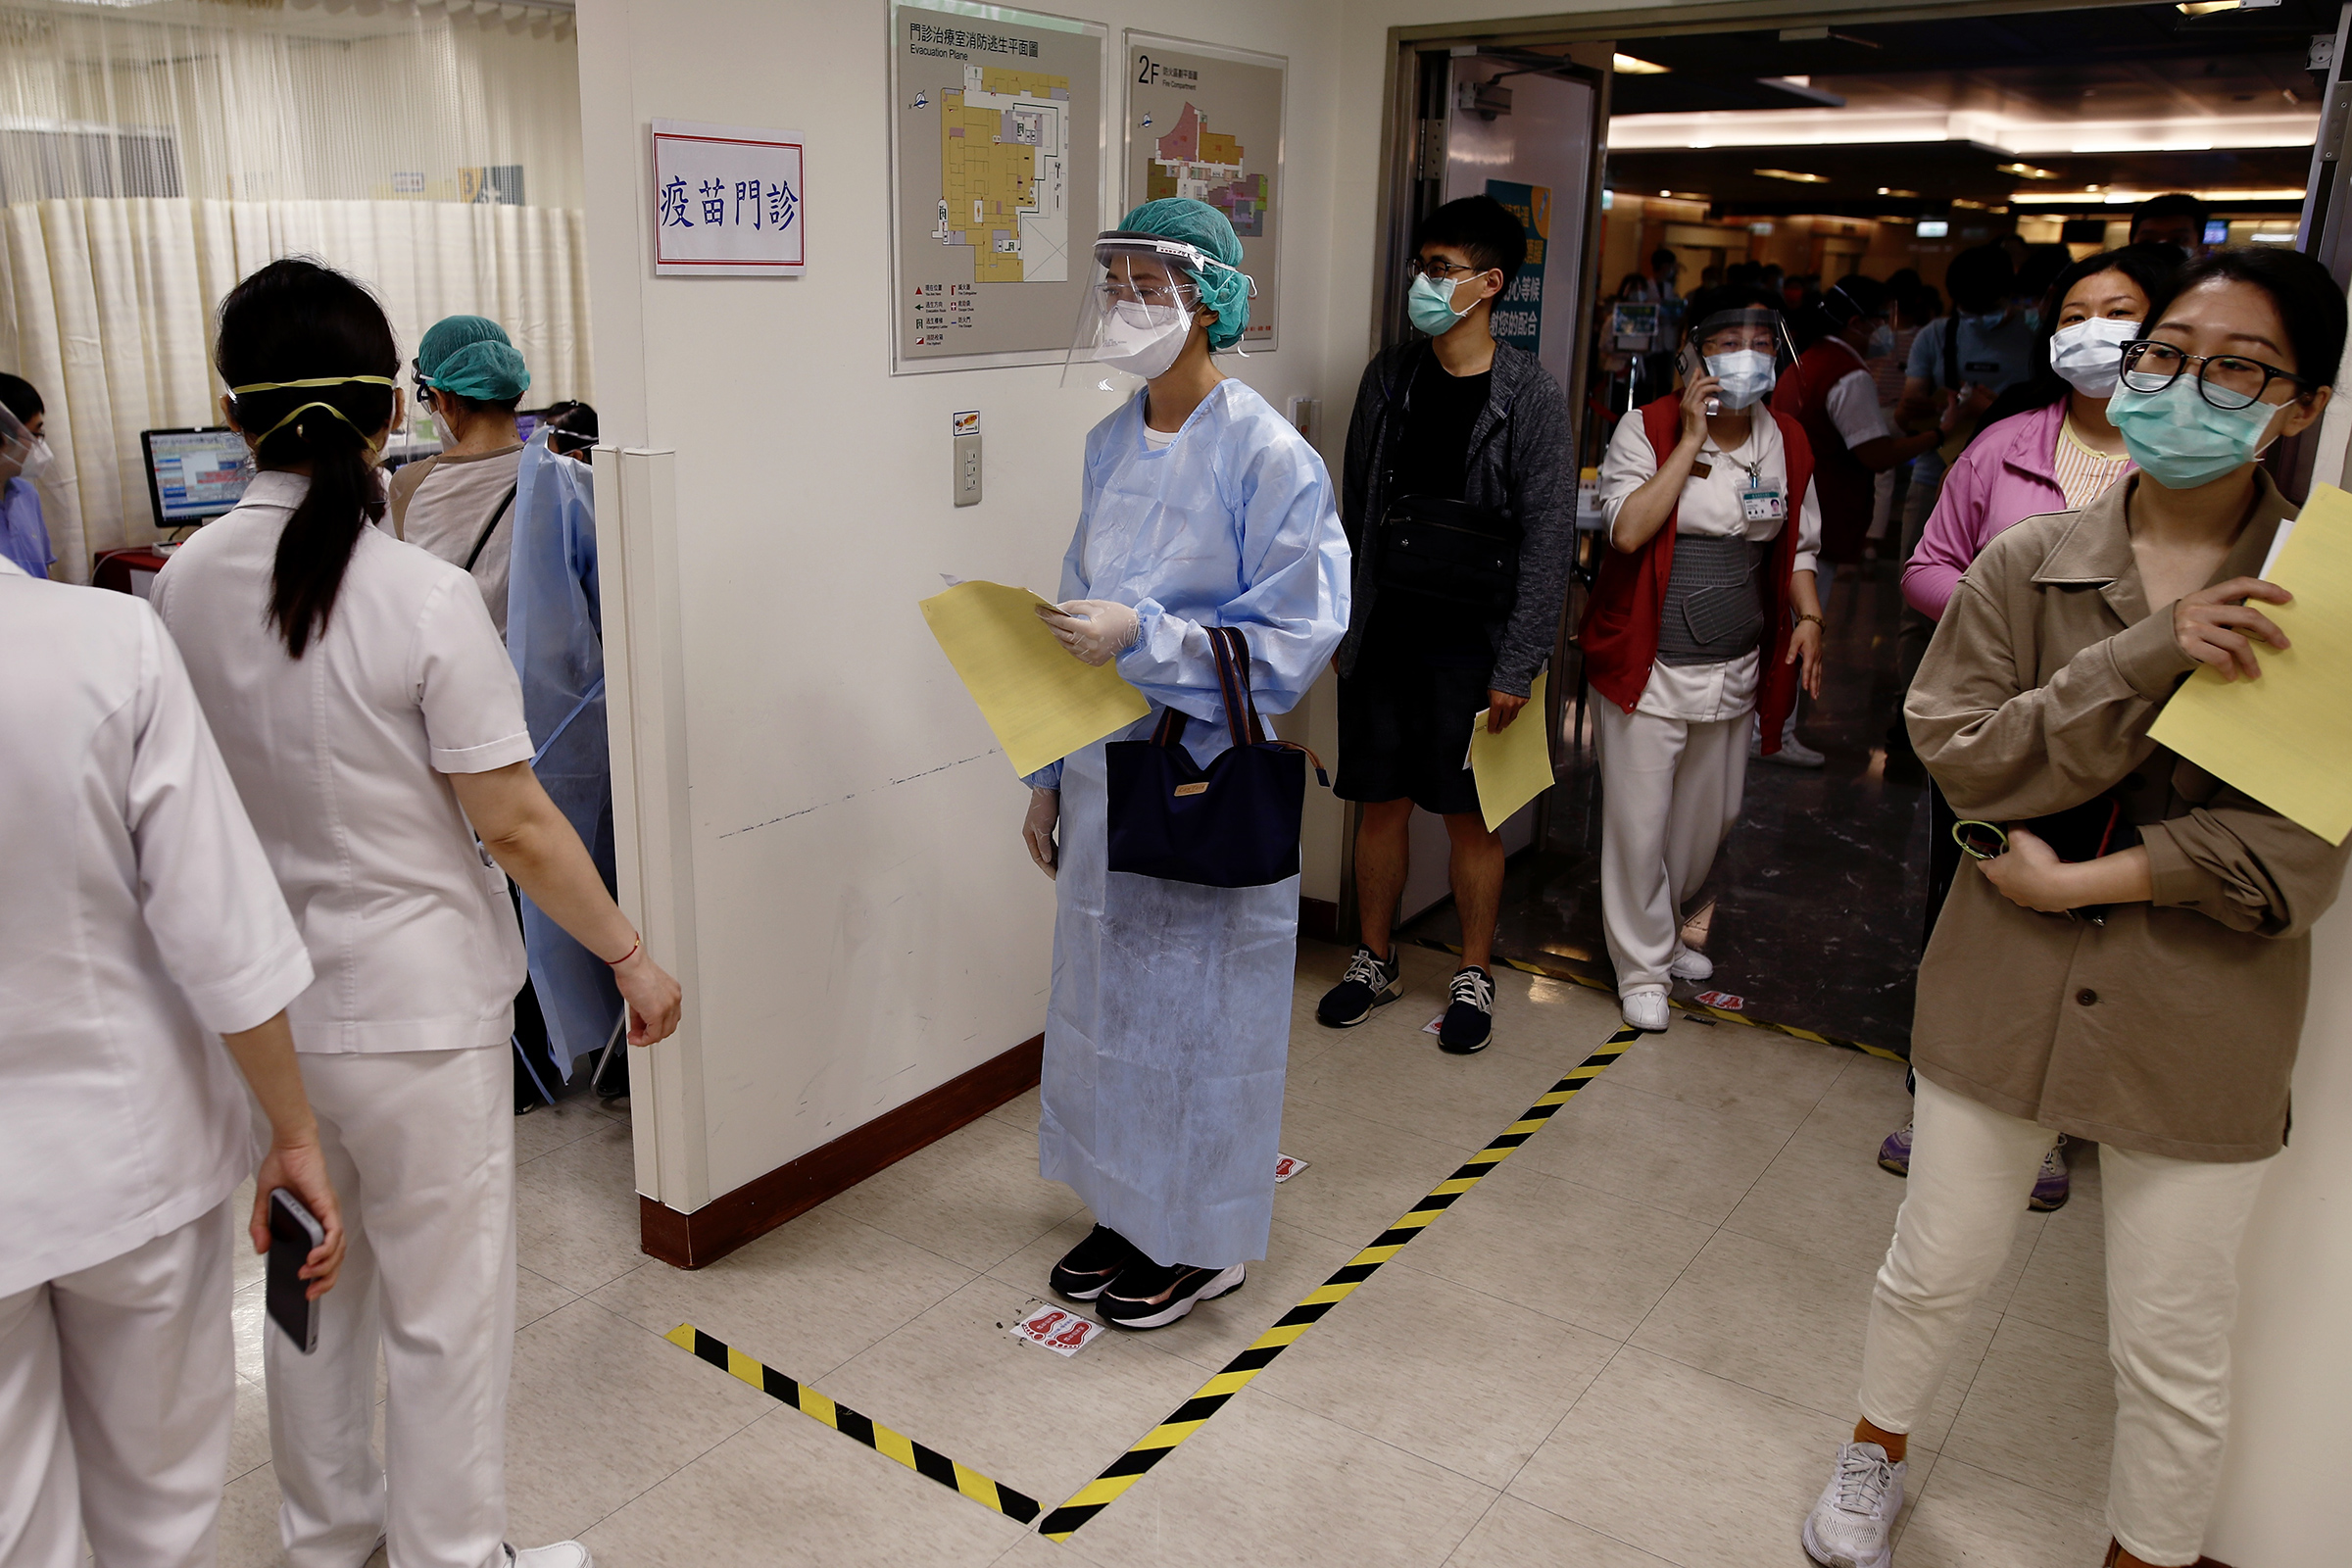 Medical workers wait to receive the AstraZeneca COVID-19 vaccine at a hospital in New Taipei on May 20, 2021. Hundreds of frontline workers received the vaccine amid the rising number of cases in Taiwan.